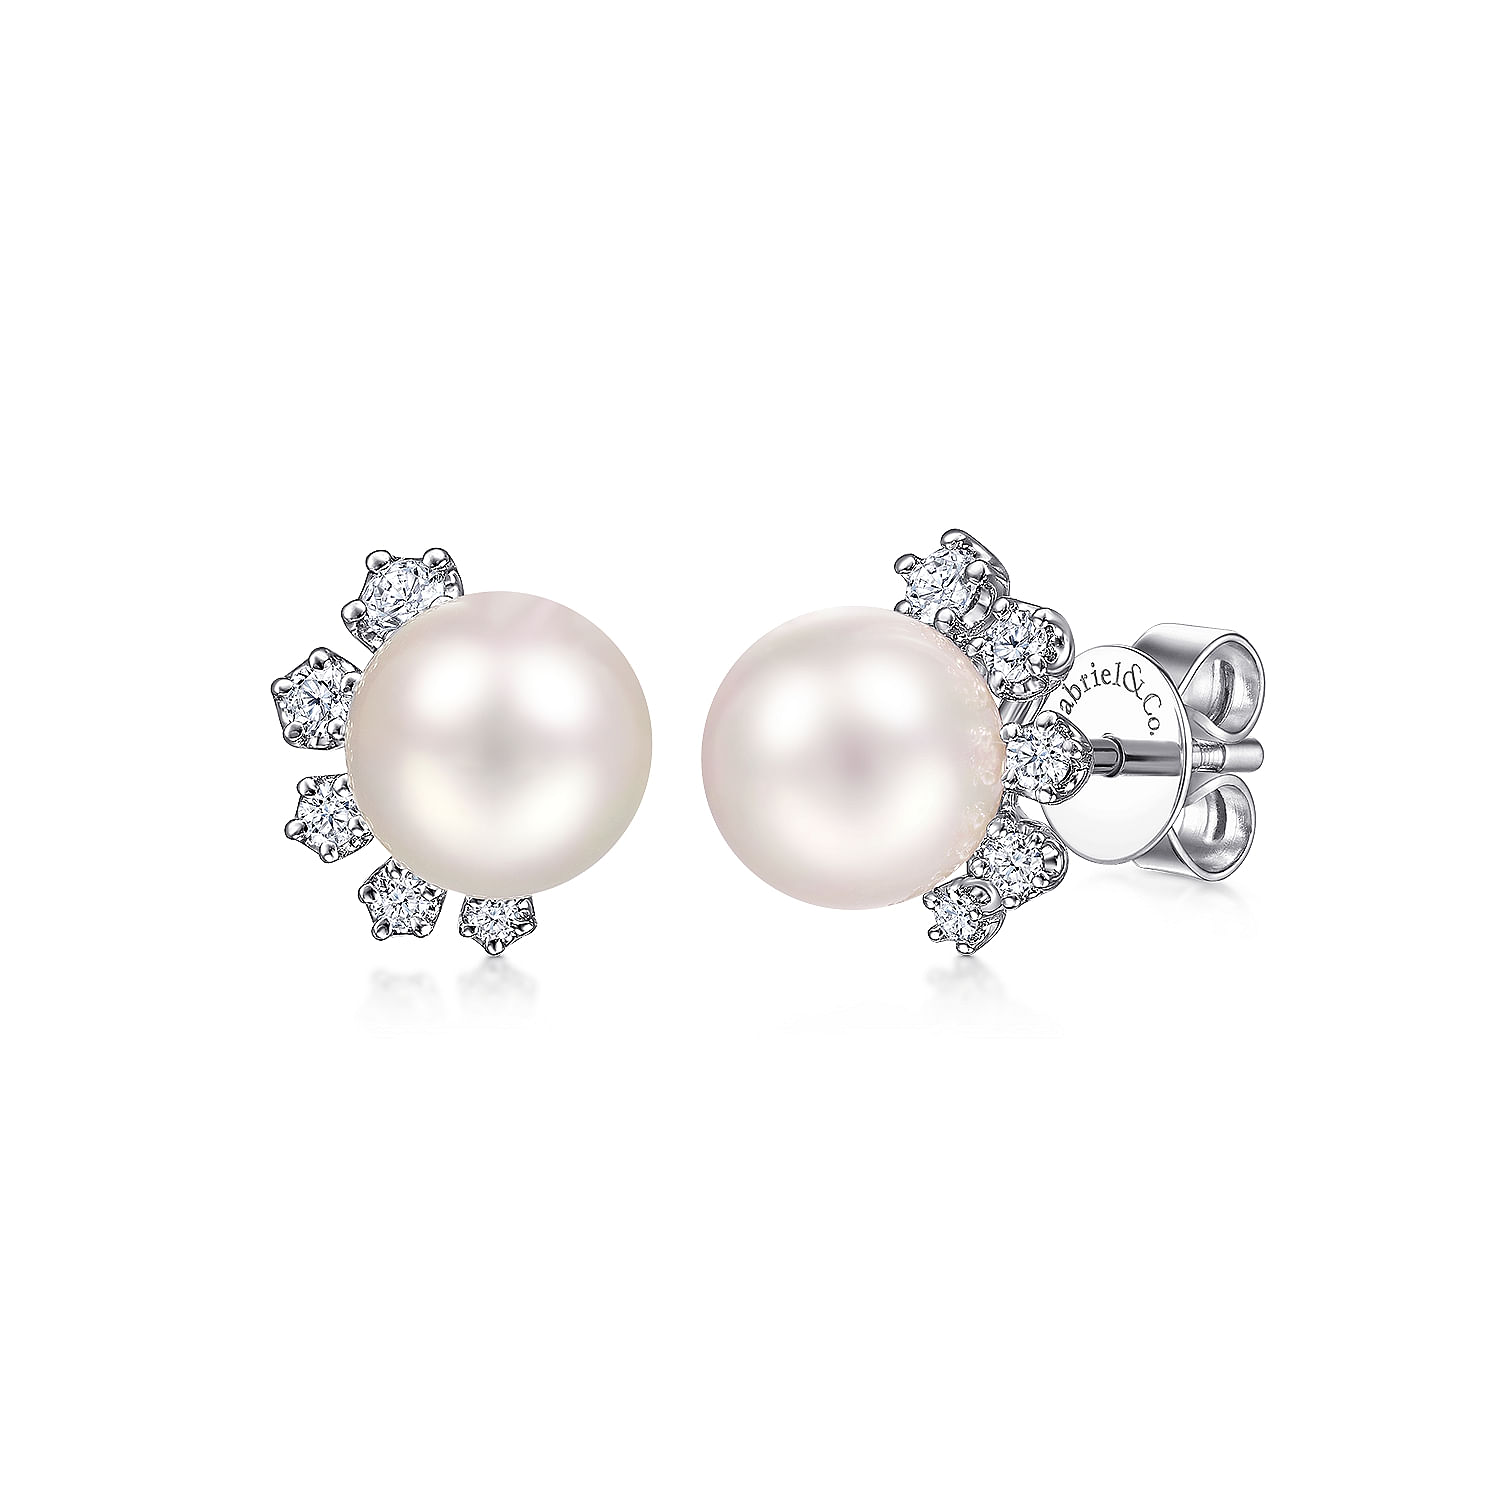 14K White Gold Pearl Stud Earrings with Diamond Accents